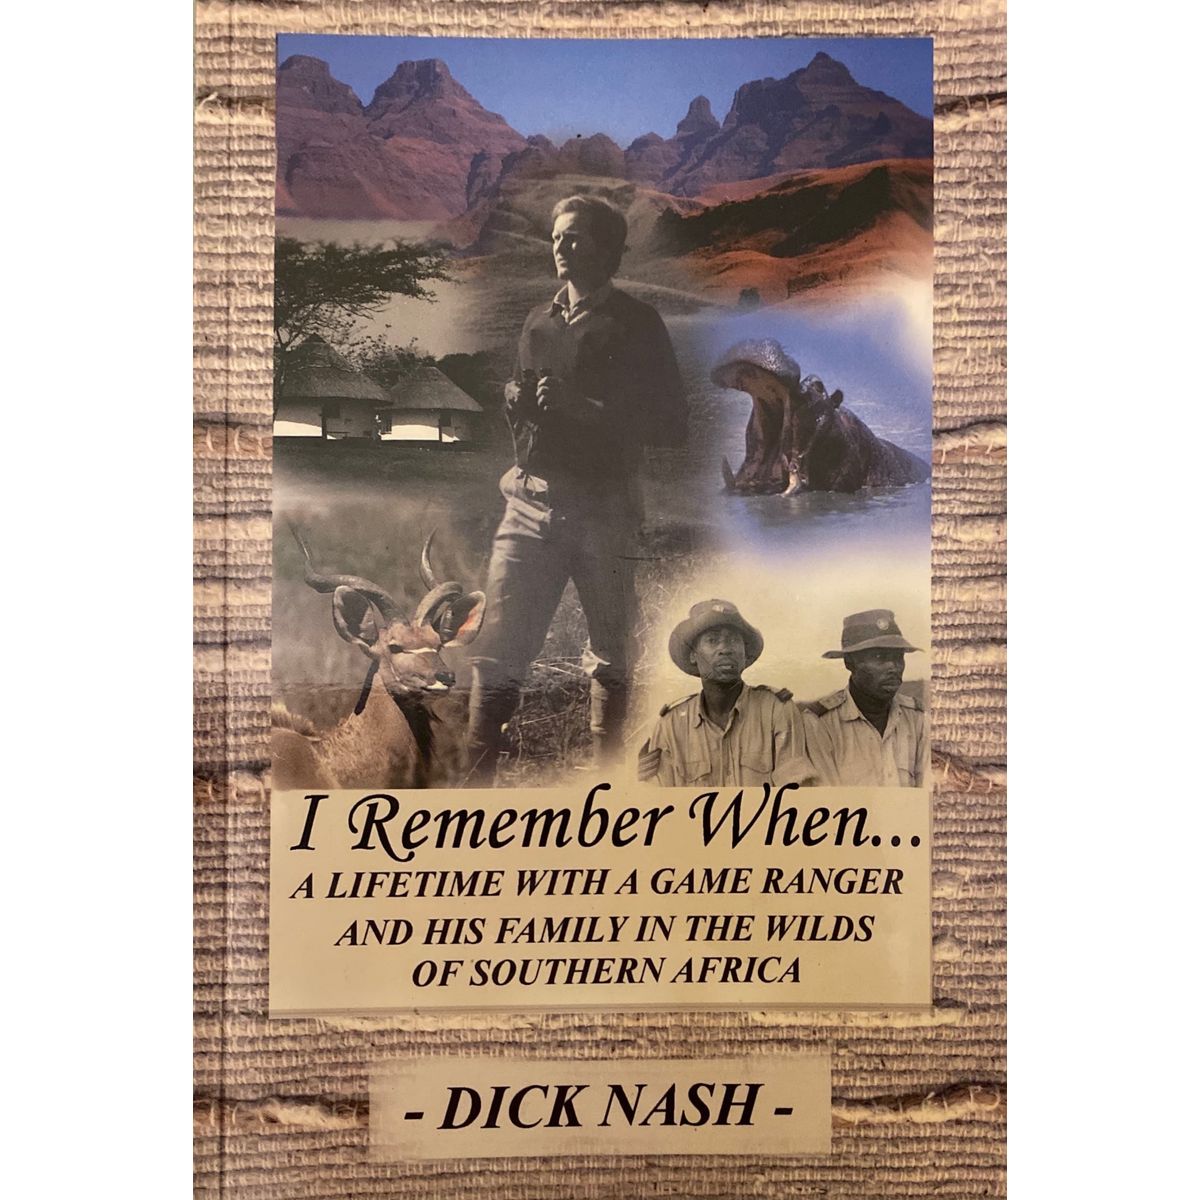 ISBN: 9780620346665 / 0620346663 - I Remember When: A Lifetime with a Game Ranger and His Family in the Wilds of Southern Africa by Dick Nash [2005]